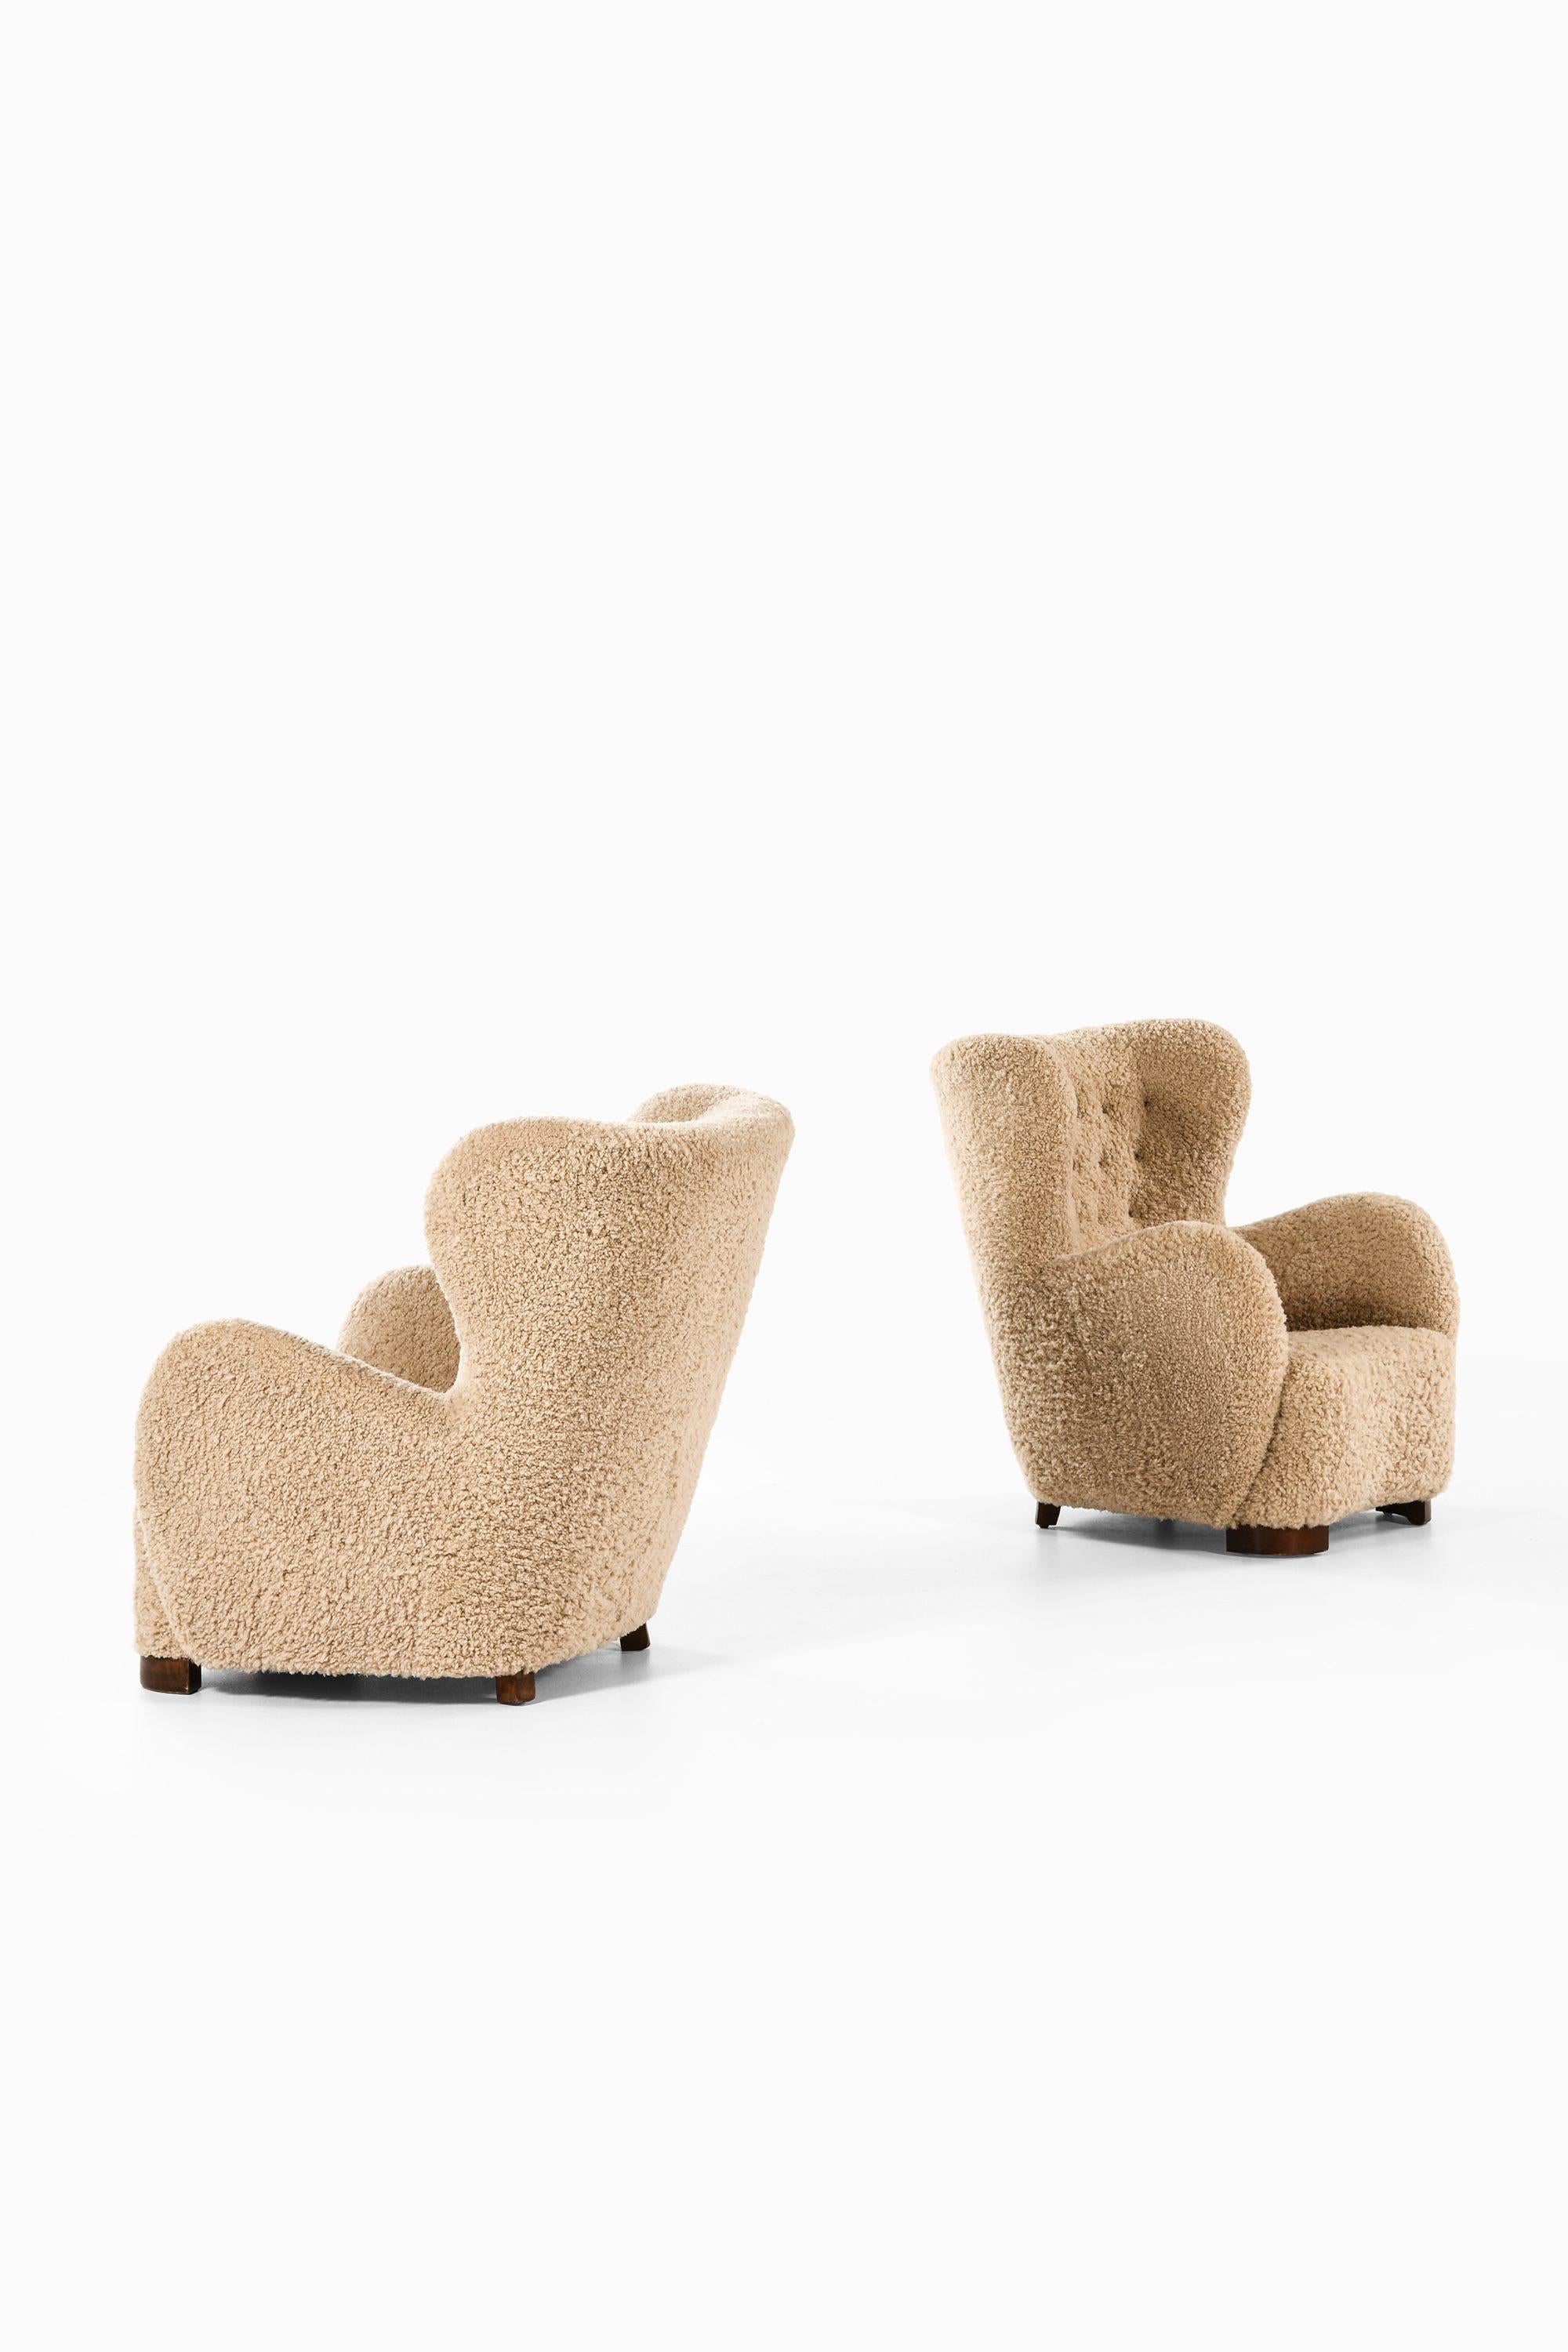 Scandinavian Modern Pair of Easy Chairs in Stained Beech and Lambskin, 1940s For Sale